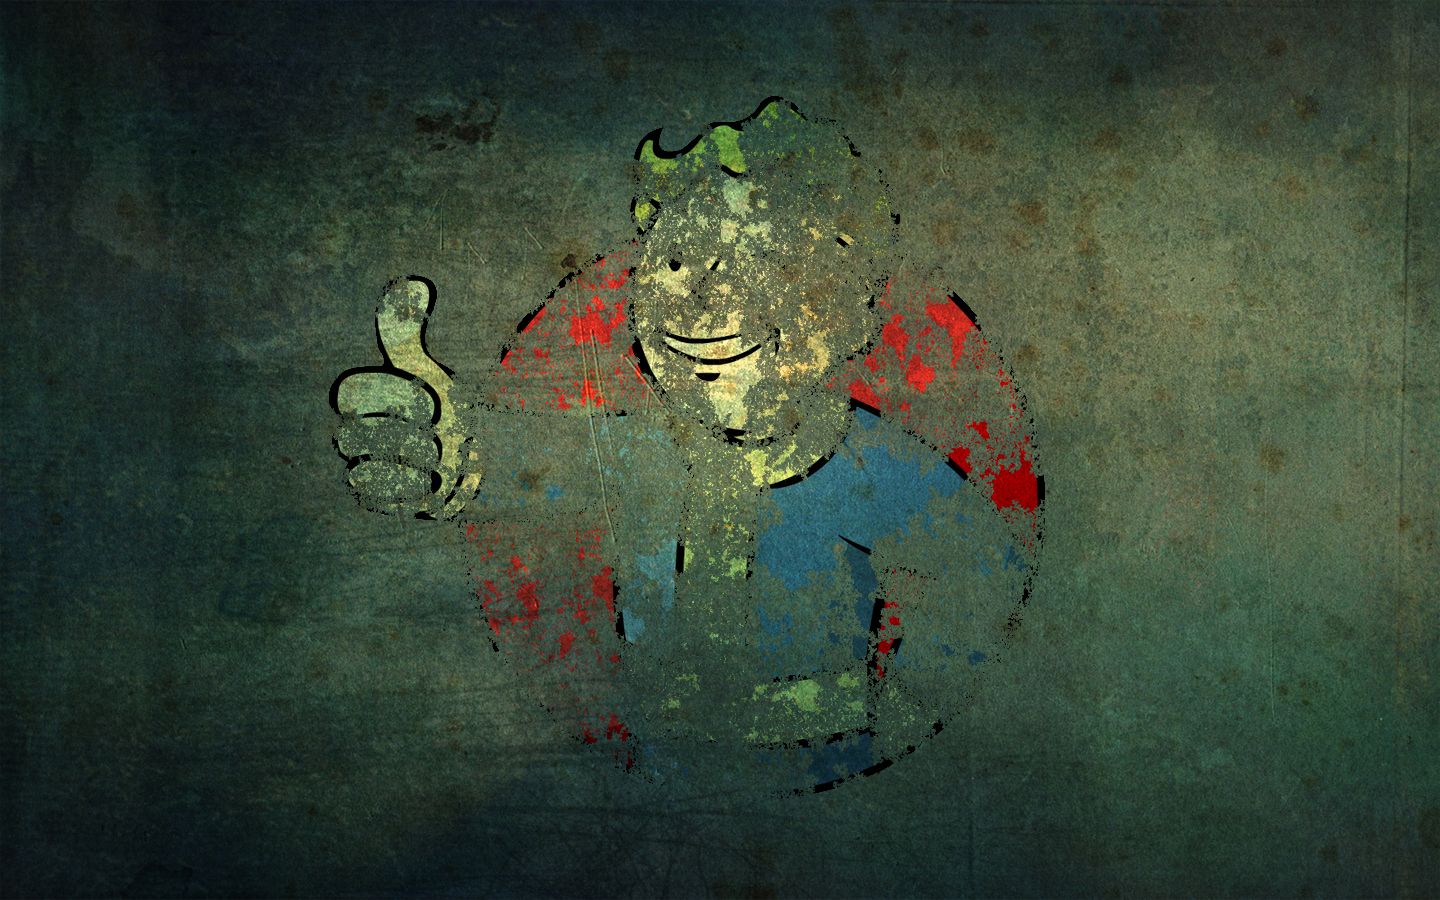 Fallout Wallpaper Top Background